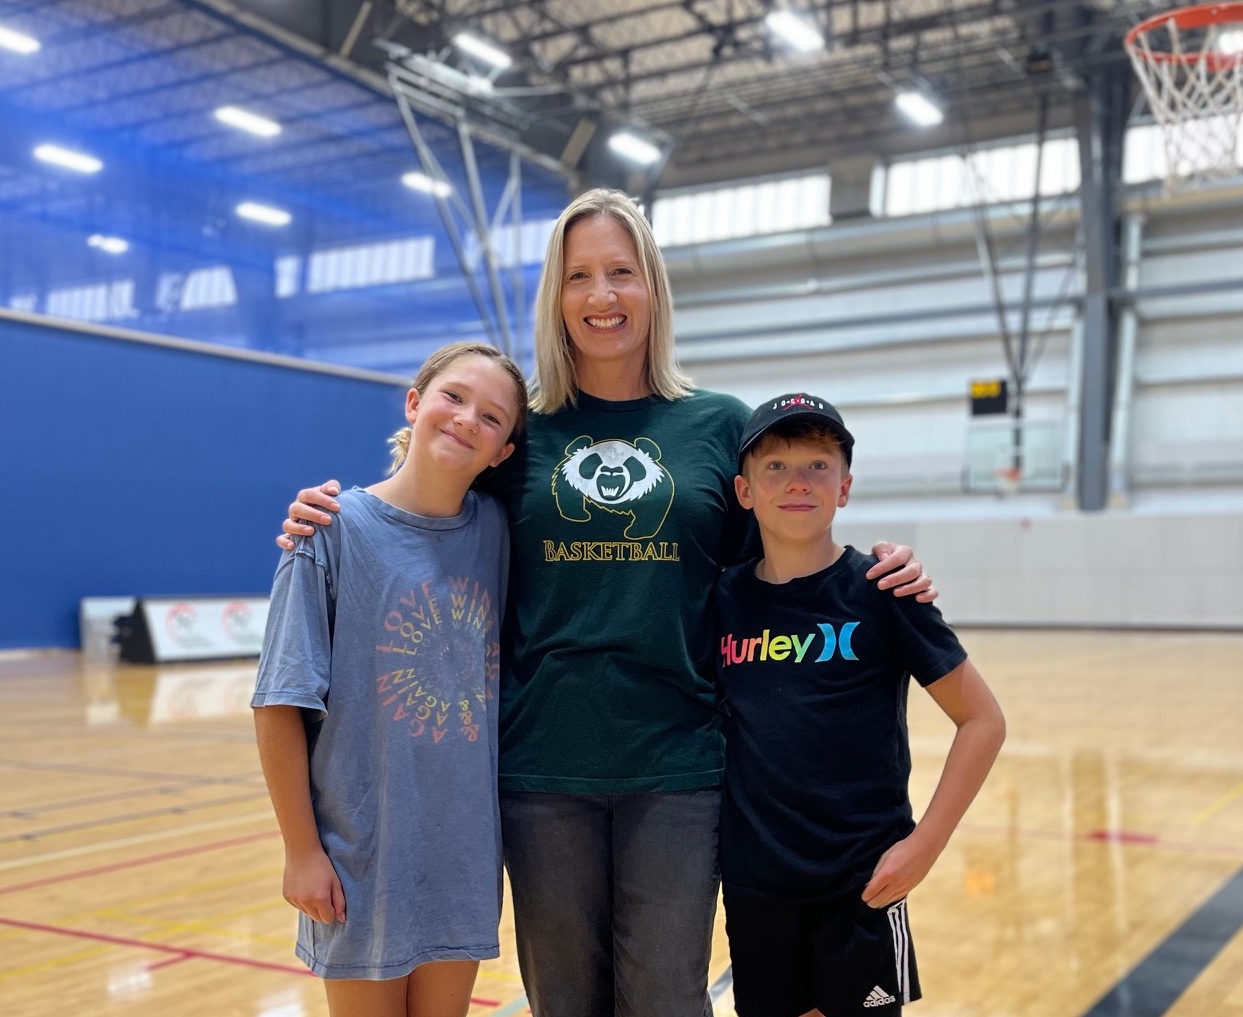 U of A graduate and former Pandas basketball player Kim Hertlein (centre) with her children Kiana (left) and Liam, who are taking part in Green & Gold Summer Camps